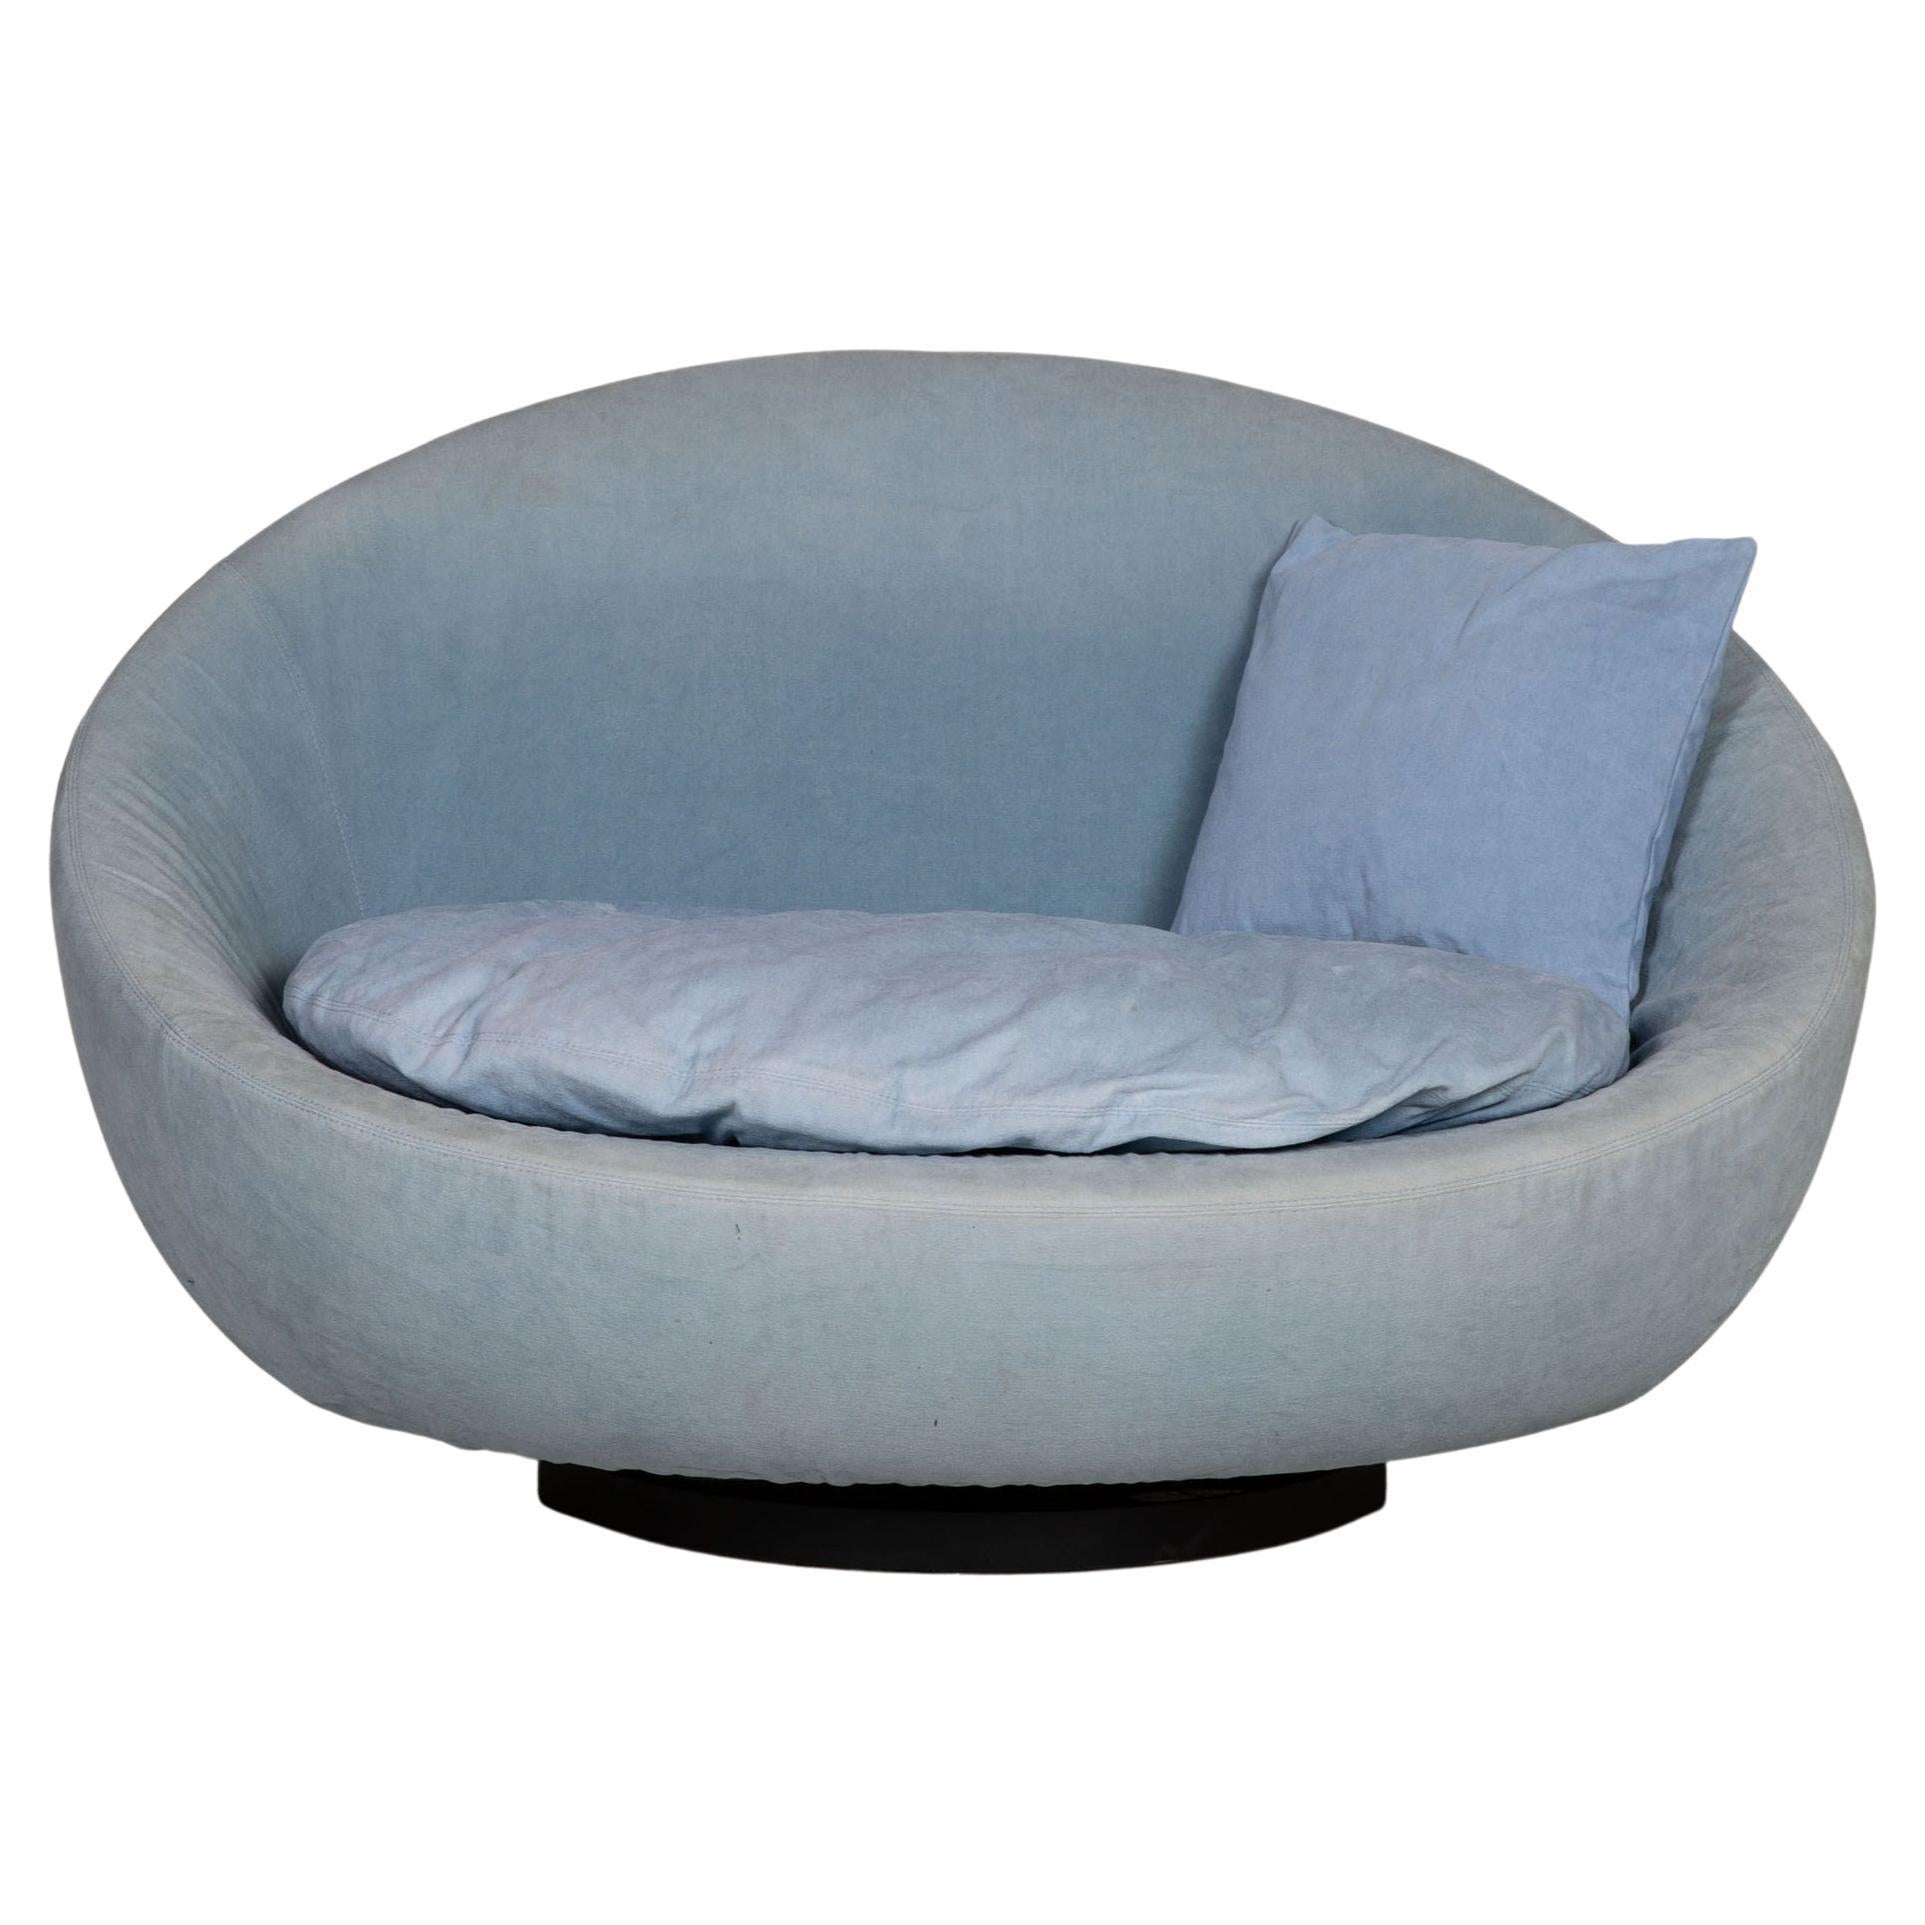 Désirée Lacoon Island Fabric Sofa Blue Two-Seater Couch